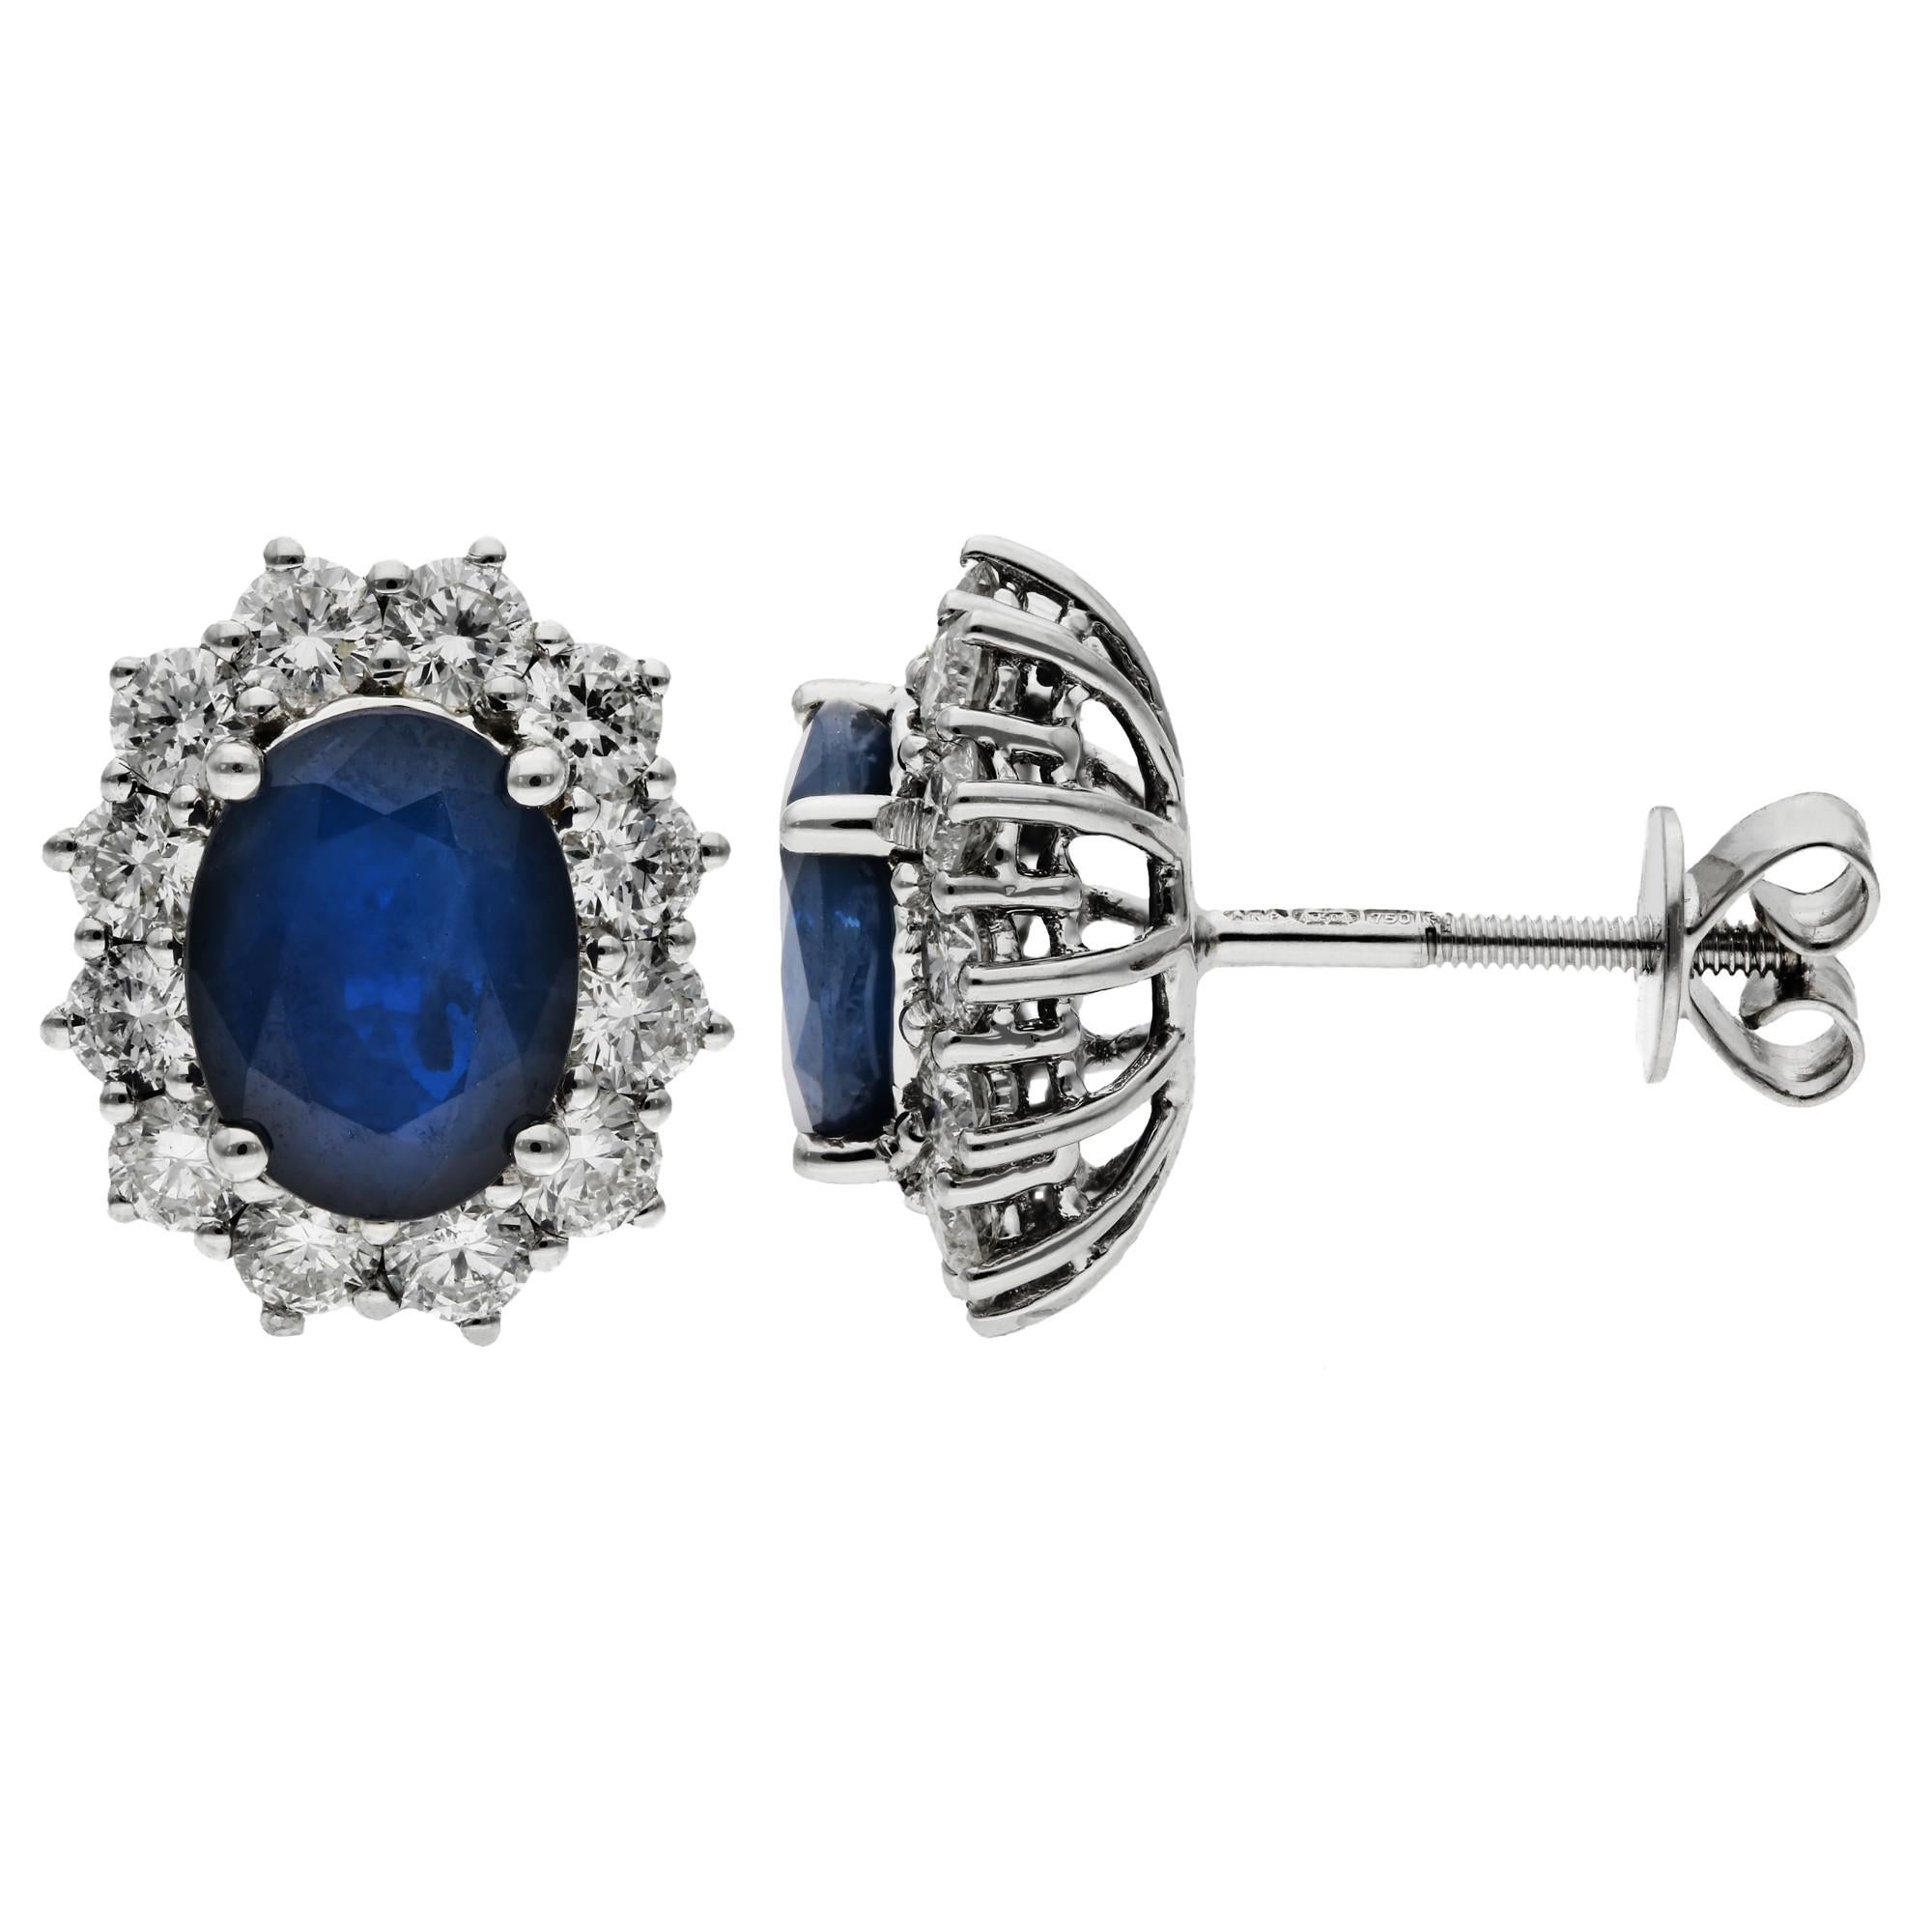 18ct White Gold 2.40ct Sapphire & 1.24ct Diamond Halo Stud Earrings

Introducing our exquisite 18ct White Gold Sapphire & Diamond Halo Stud Earrings, a timeless expression of elegance and sophistication. Each earring centres around a magnificent